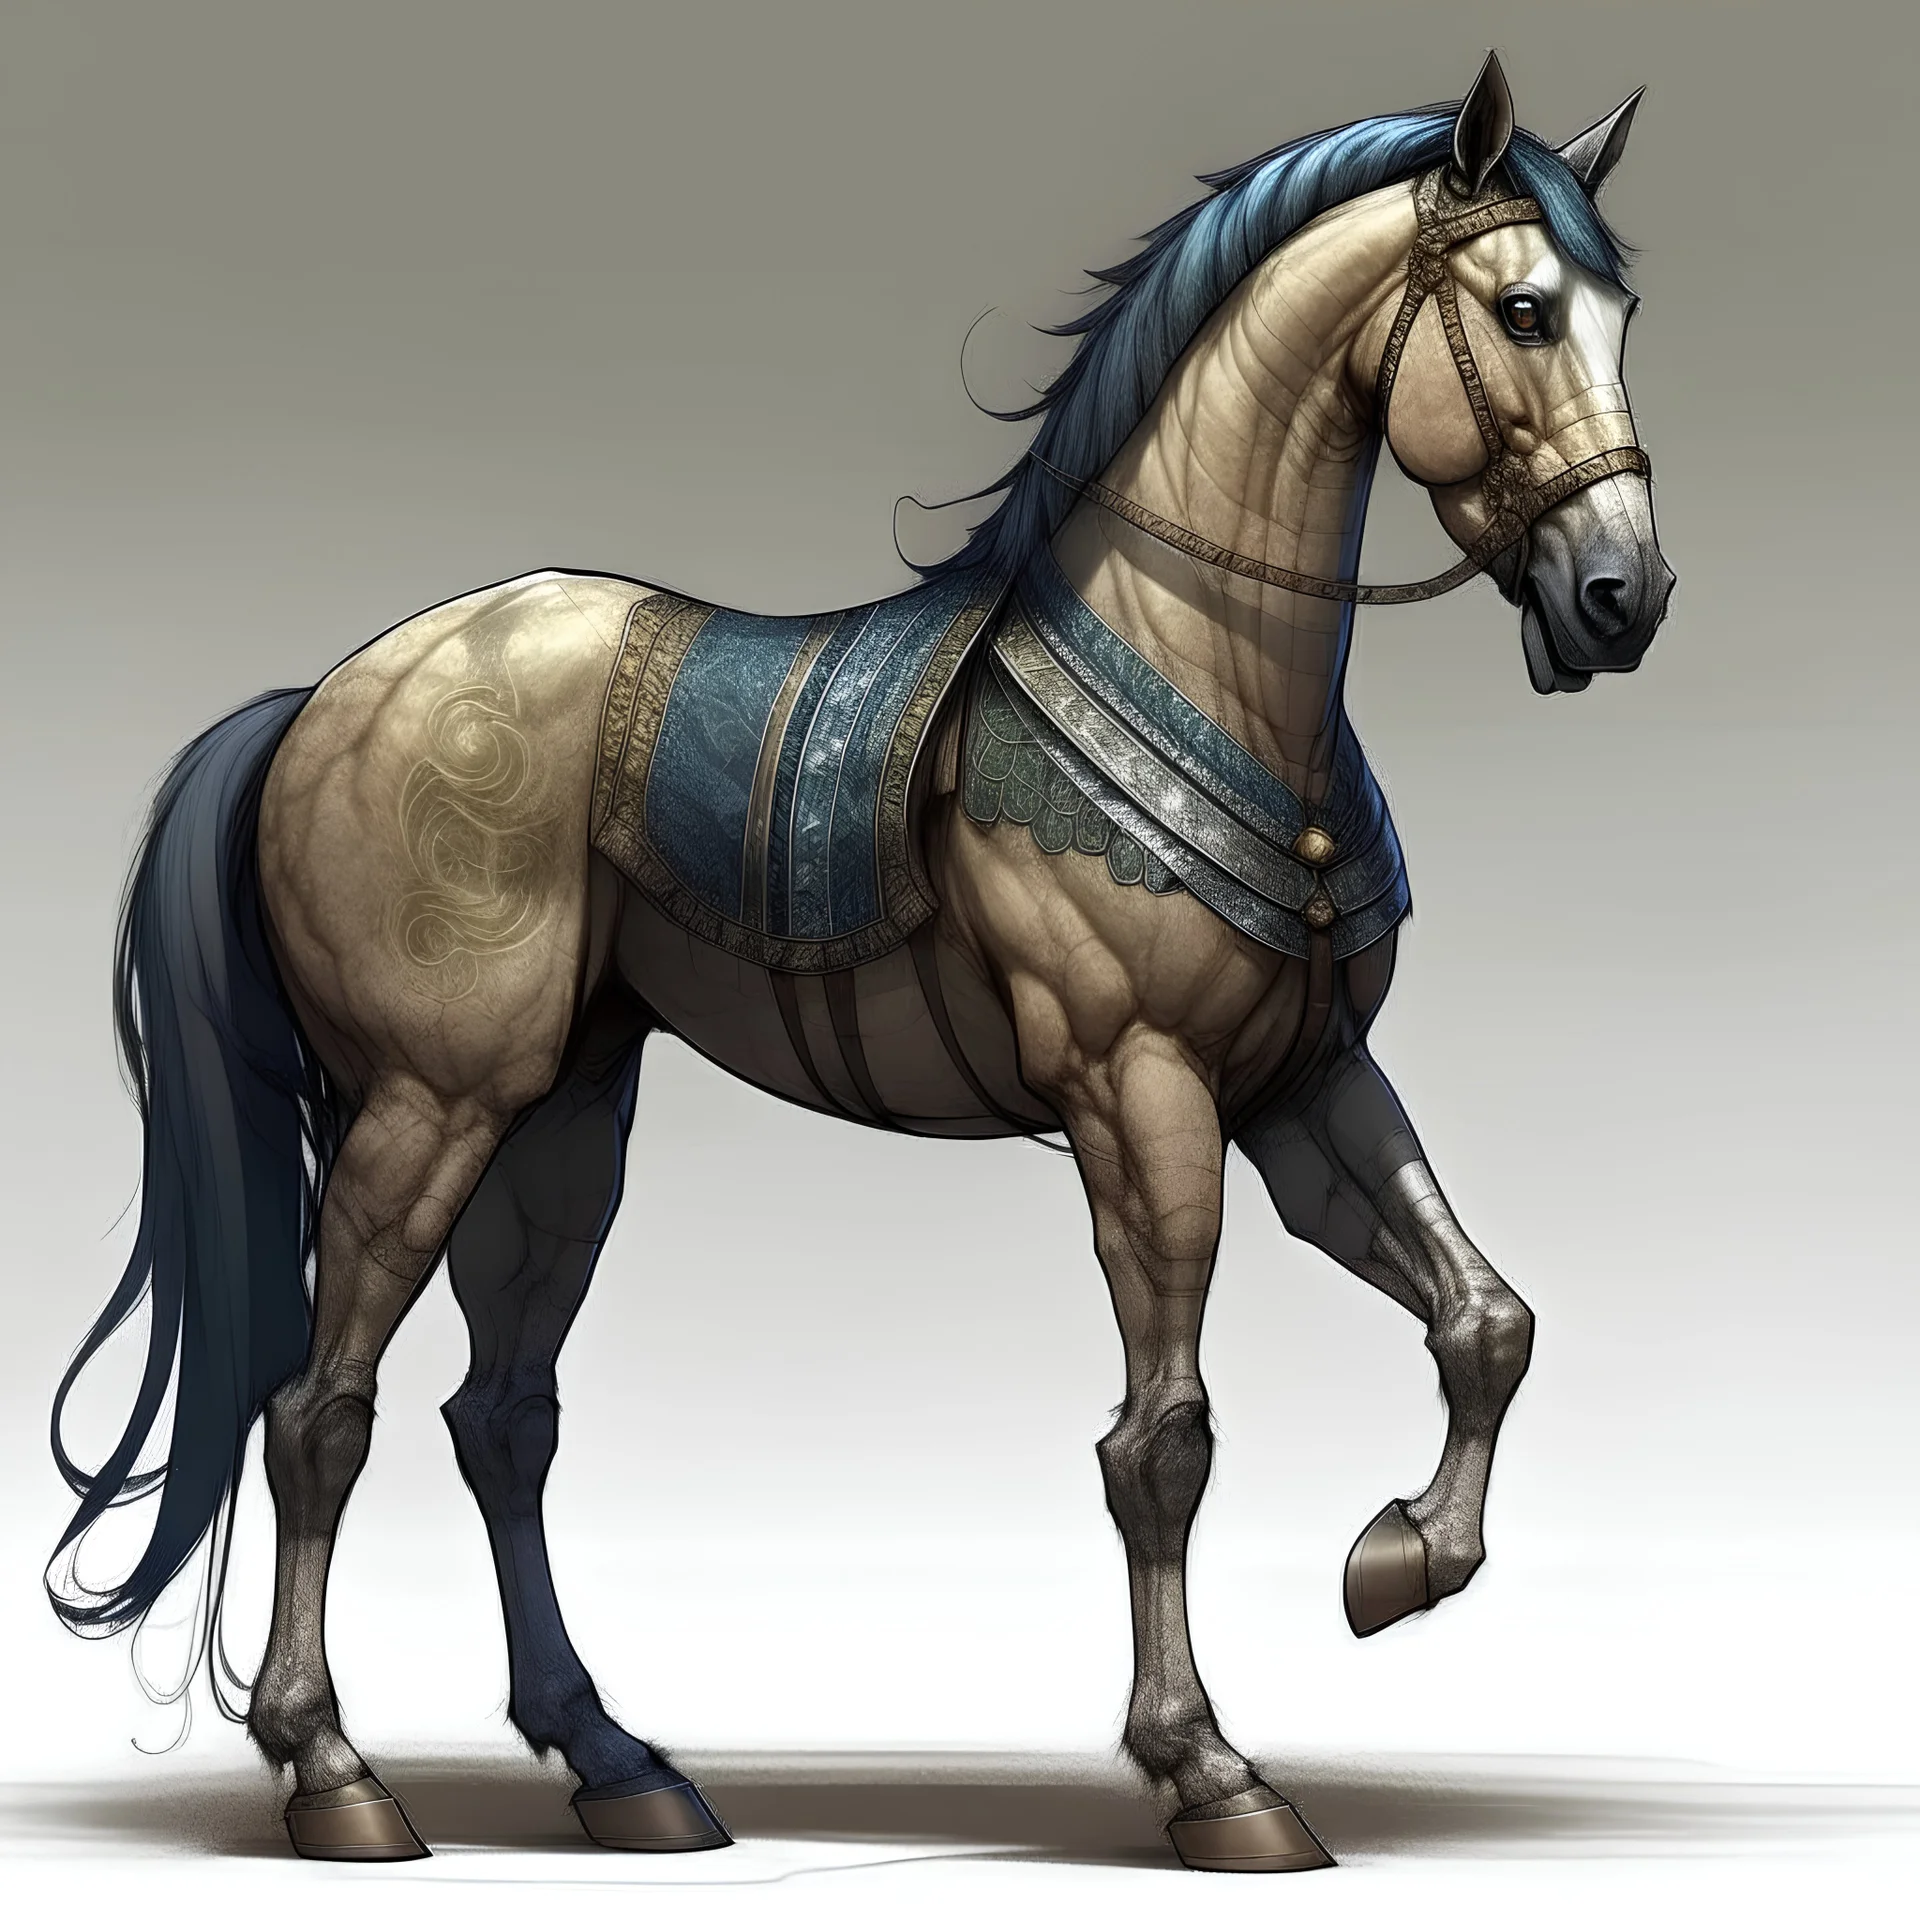 Mythical creature half-man half-horse, man merged with the horse, one single creature fused